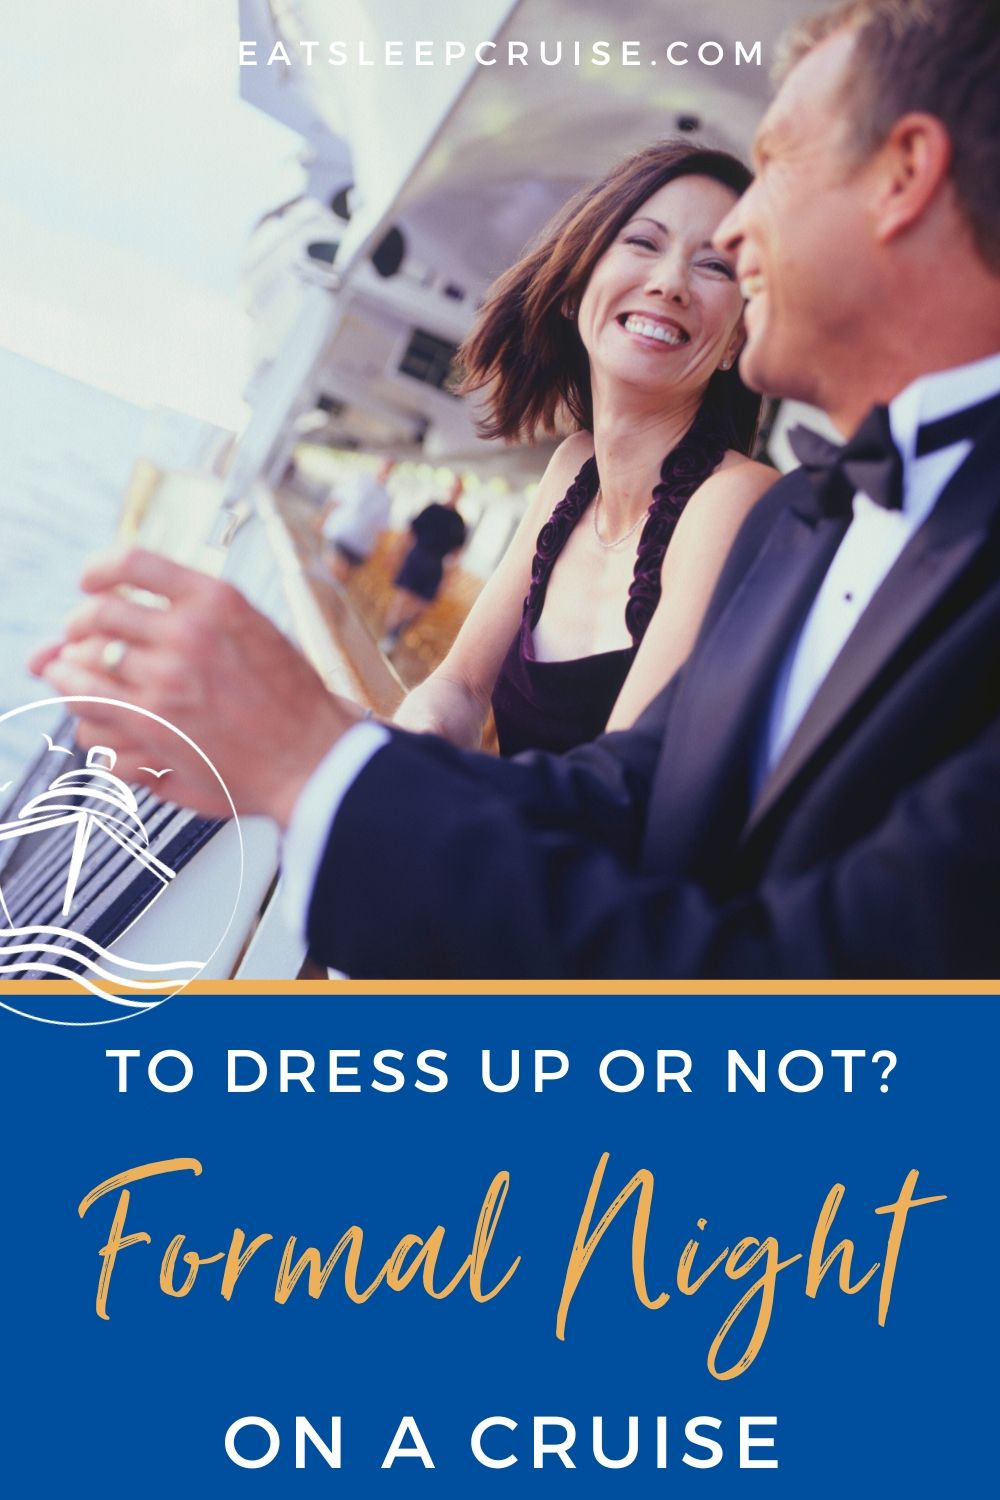 To Dress Up or Not: Guide to What to Wear on Cruise Formal Night